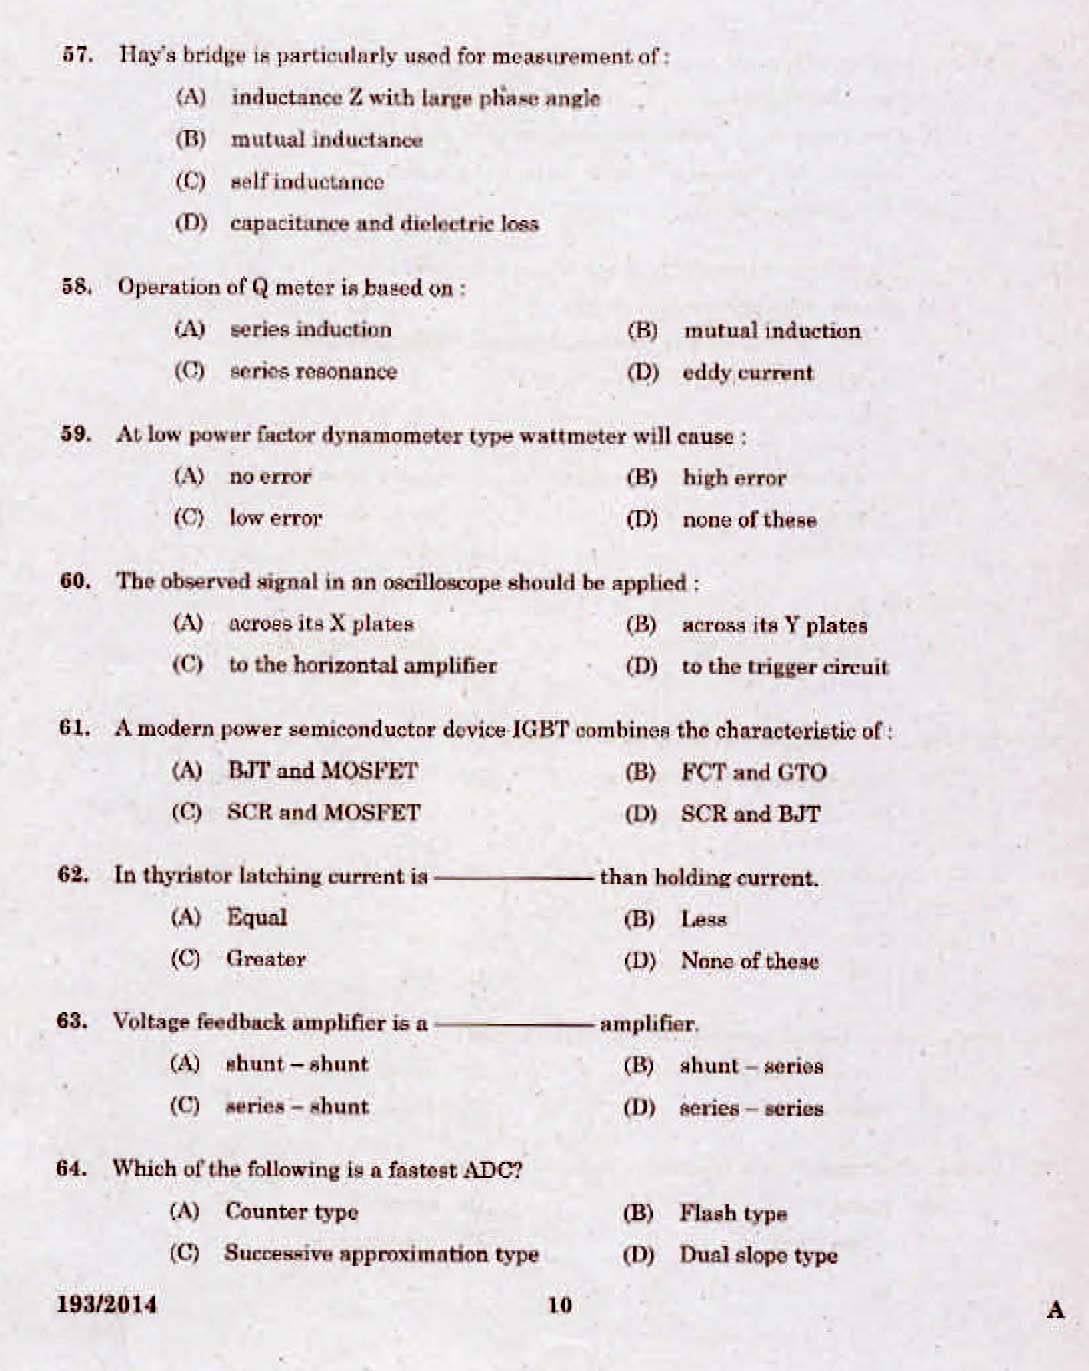 Kerala PSC Assistant Engineer Electrical Exam 2014 Question Paper Code 1932014 8